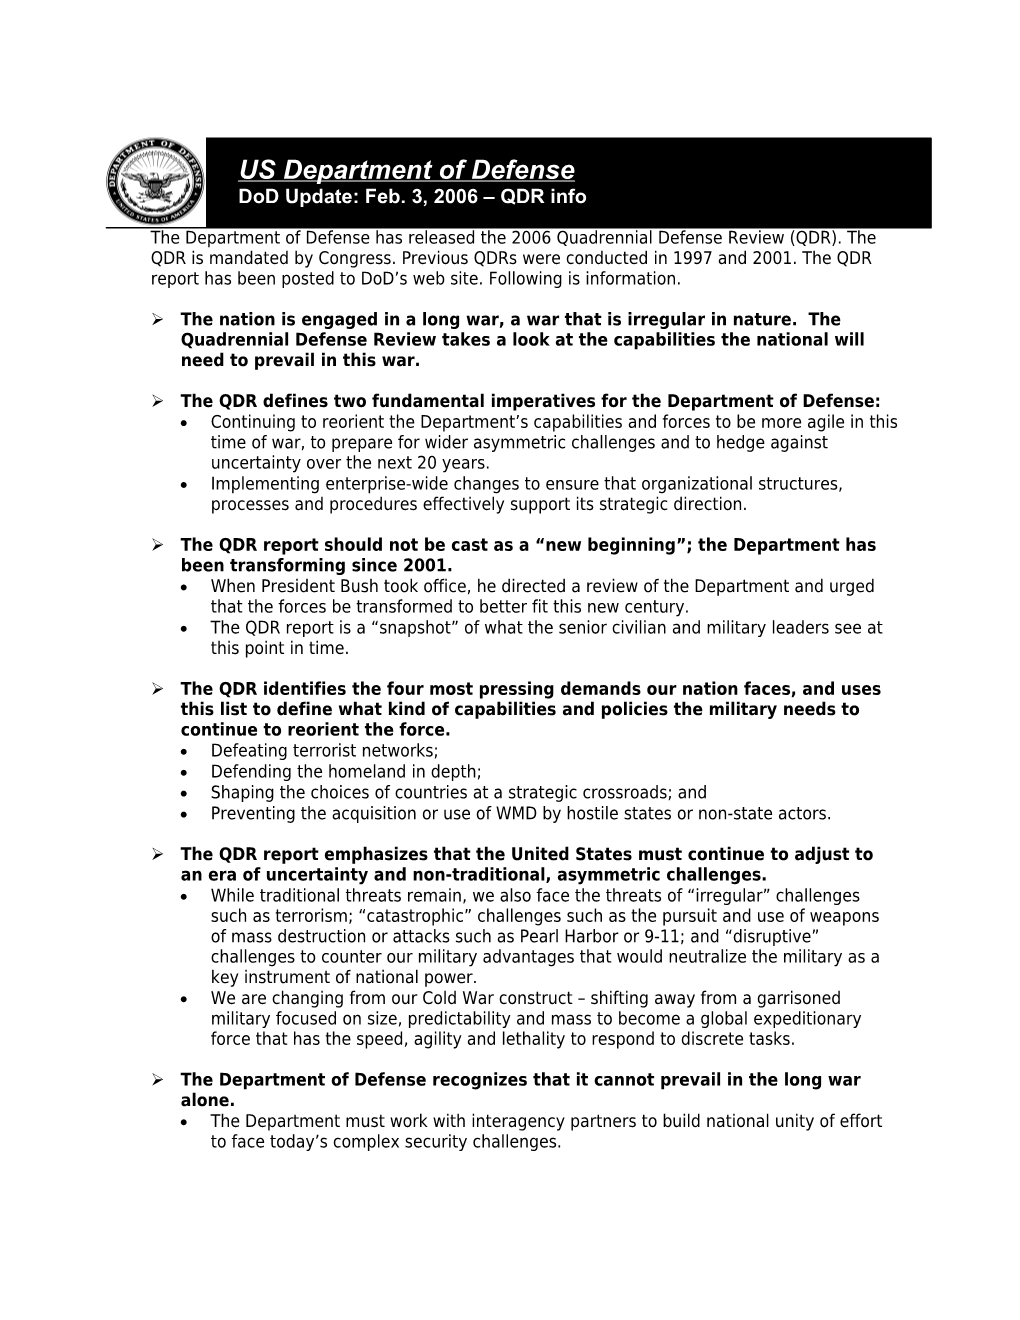 The Department of Defense Has Released the 2006 Quadrennial Defense Review Report